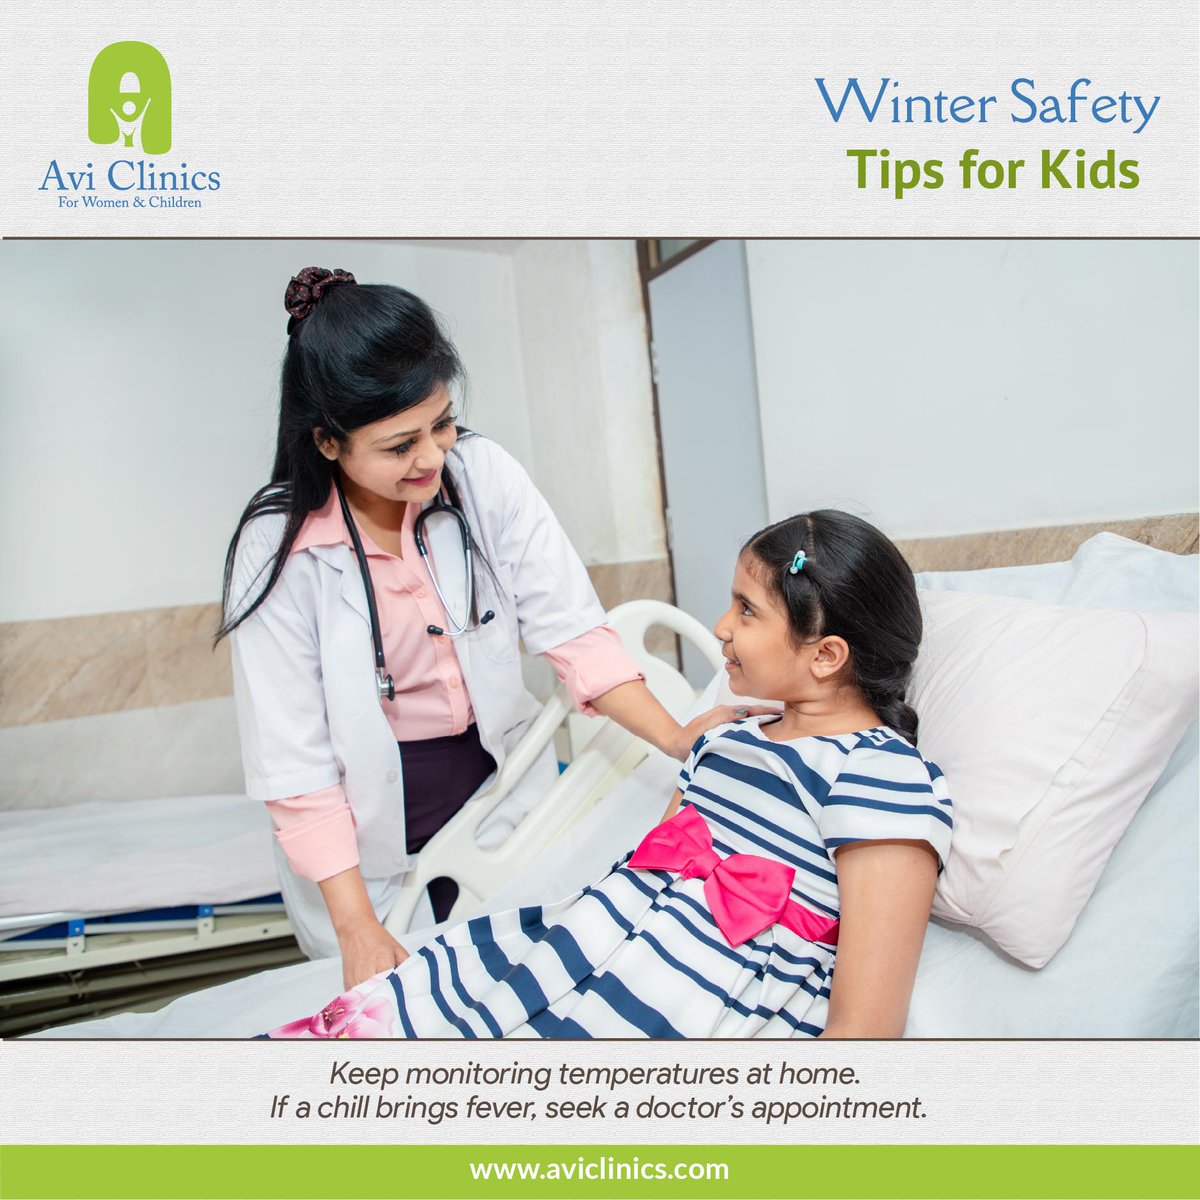 Winter Safety Tips for Kids.
The Avi Clinic guide: Keep monitoring temperatures at home. If a chill brings fever, seek a doctor’s appointment  

#Weather #WeatherSafety #WeatherSafetyTips #TipsForKids #WinterTips